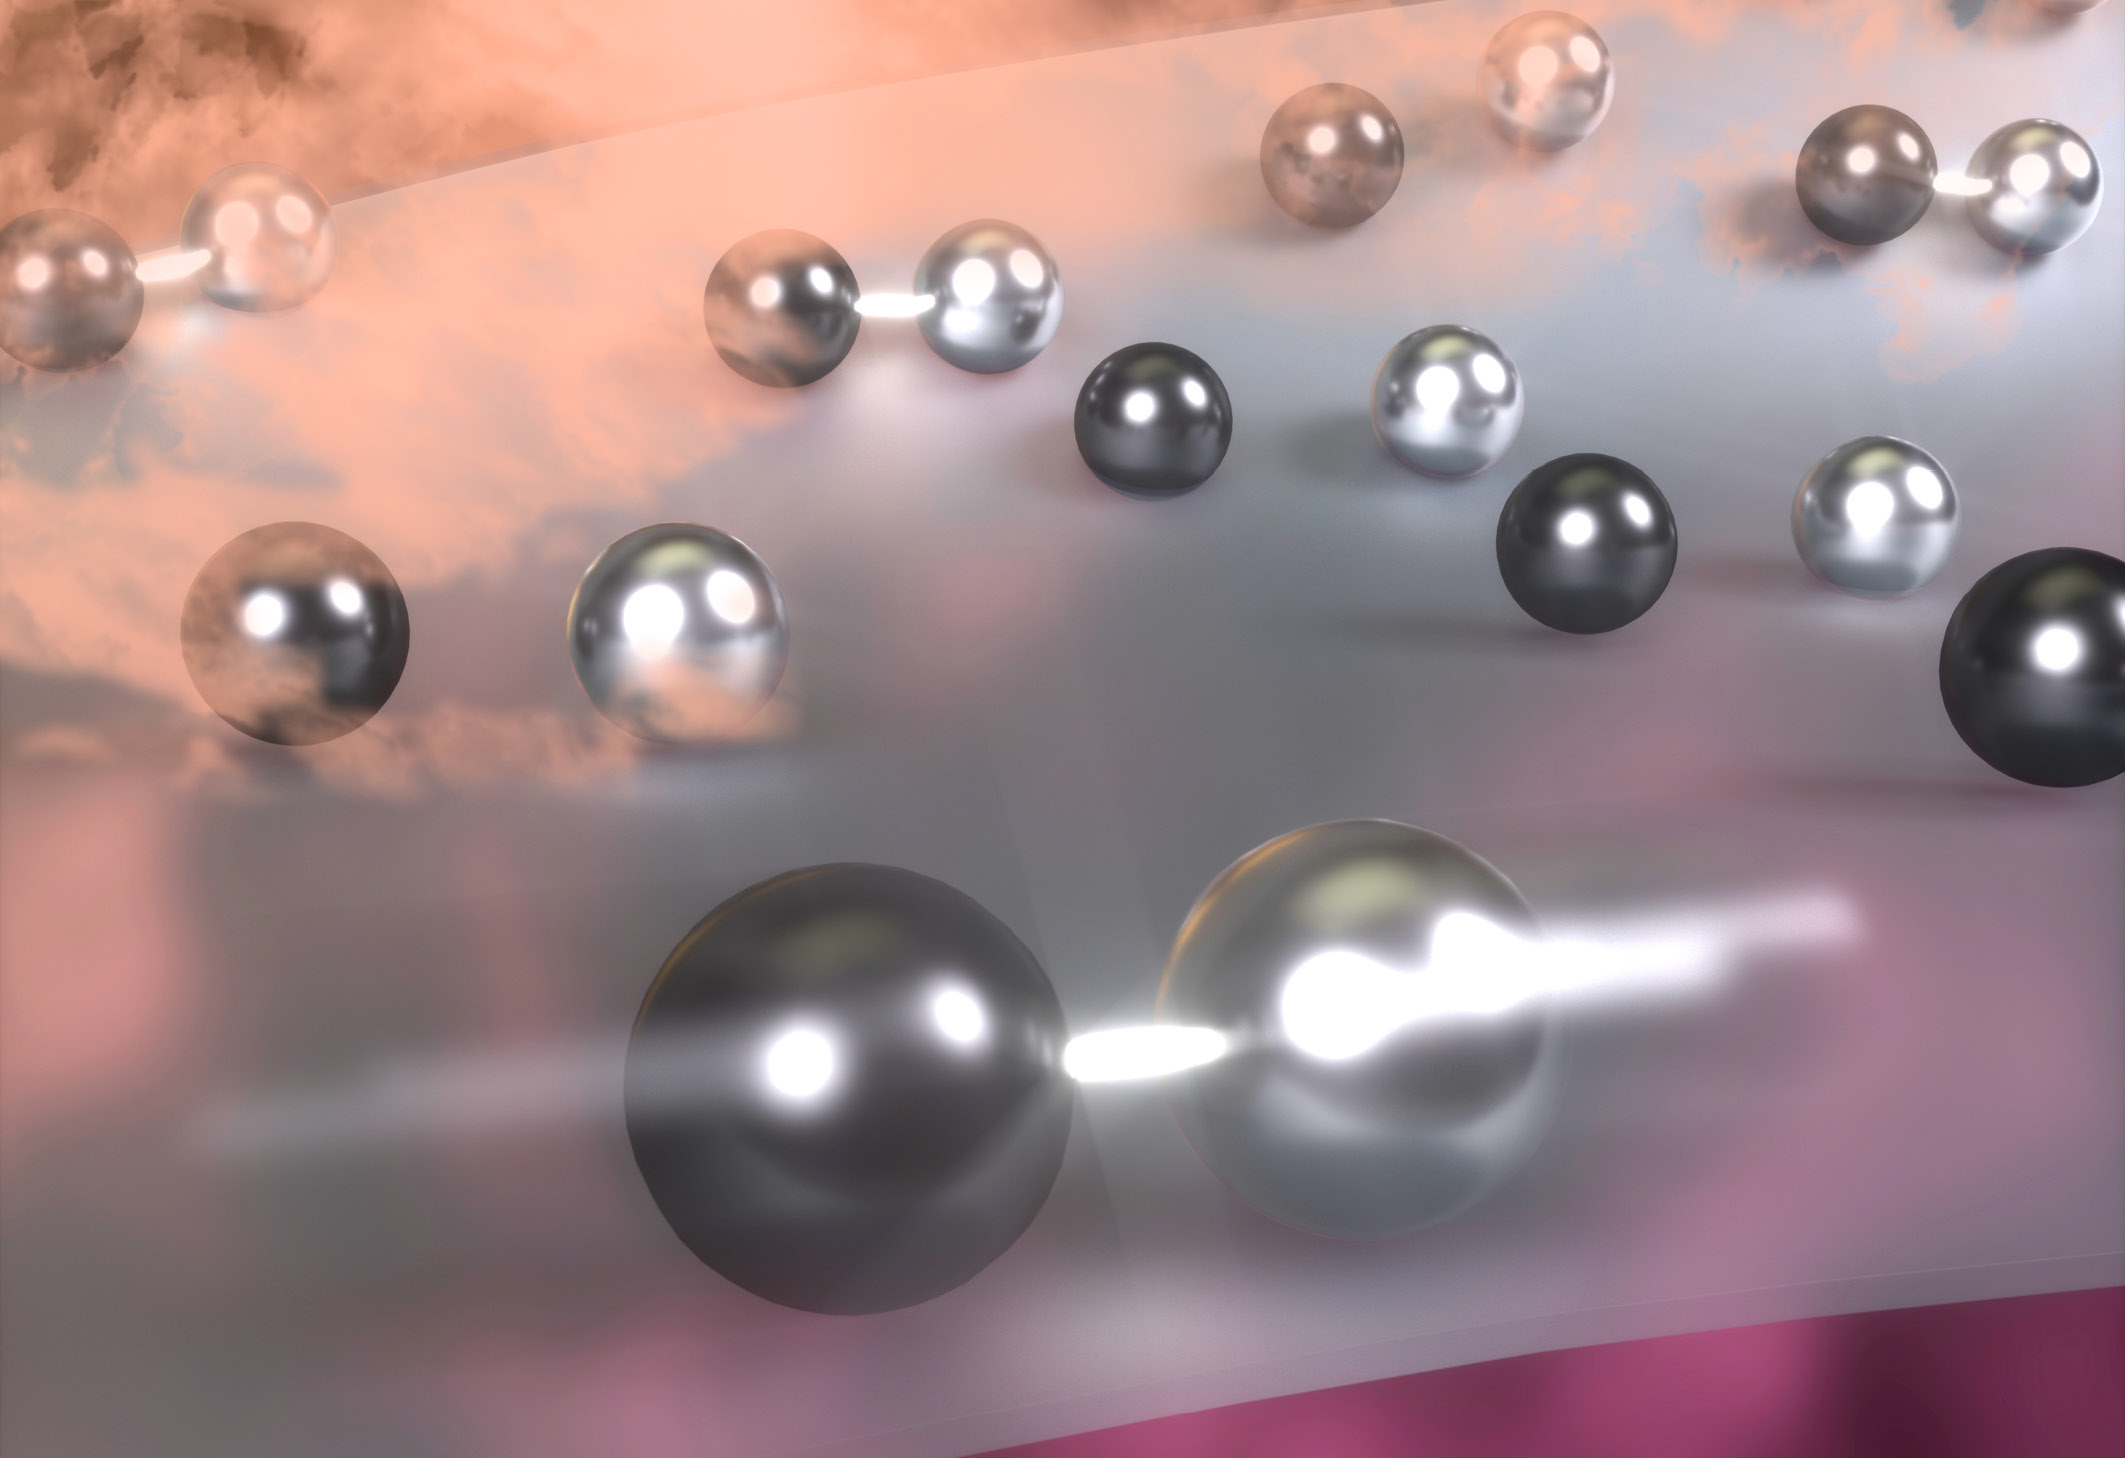 Artist concept illustration depicting pairs of rhodium and tungsten atoms finding<br />
    each other and performing chemistry on a porous carrier, called a support